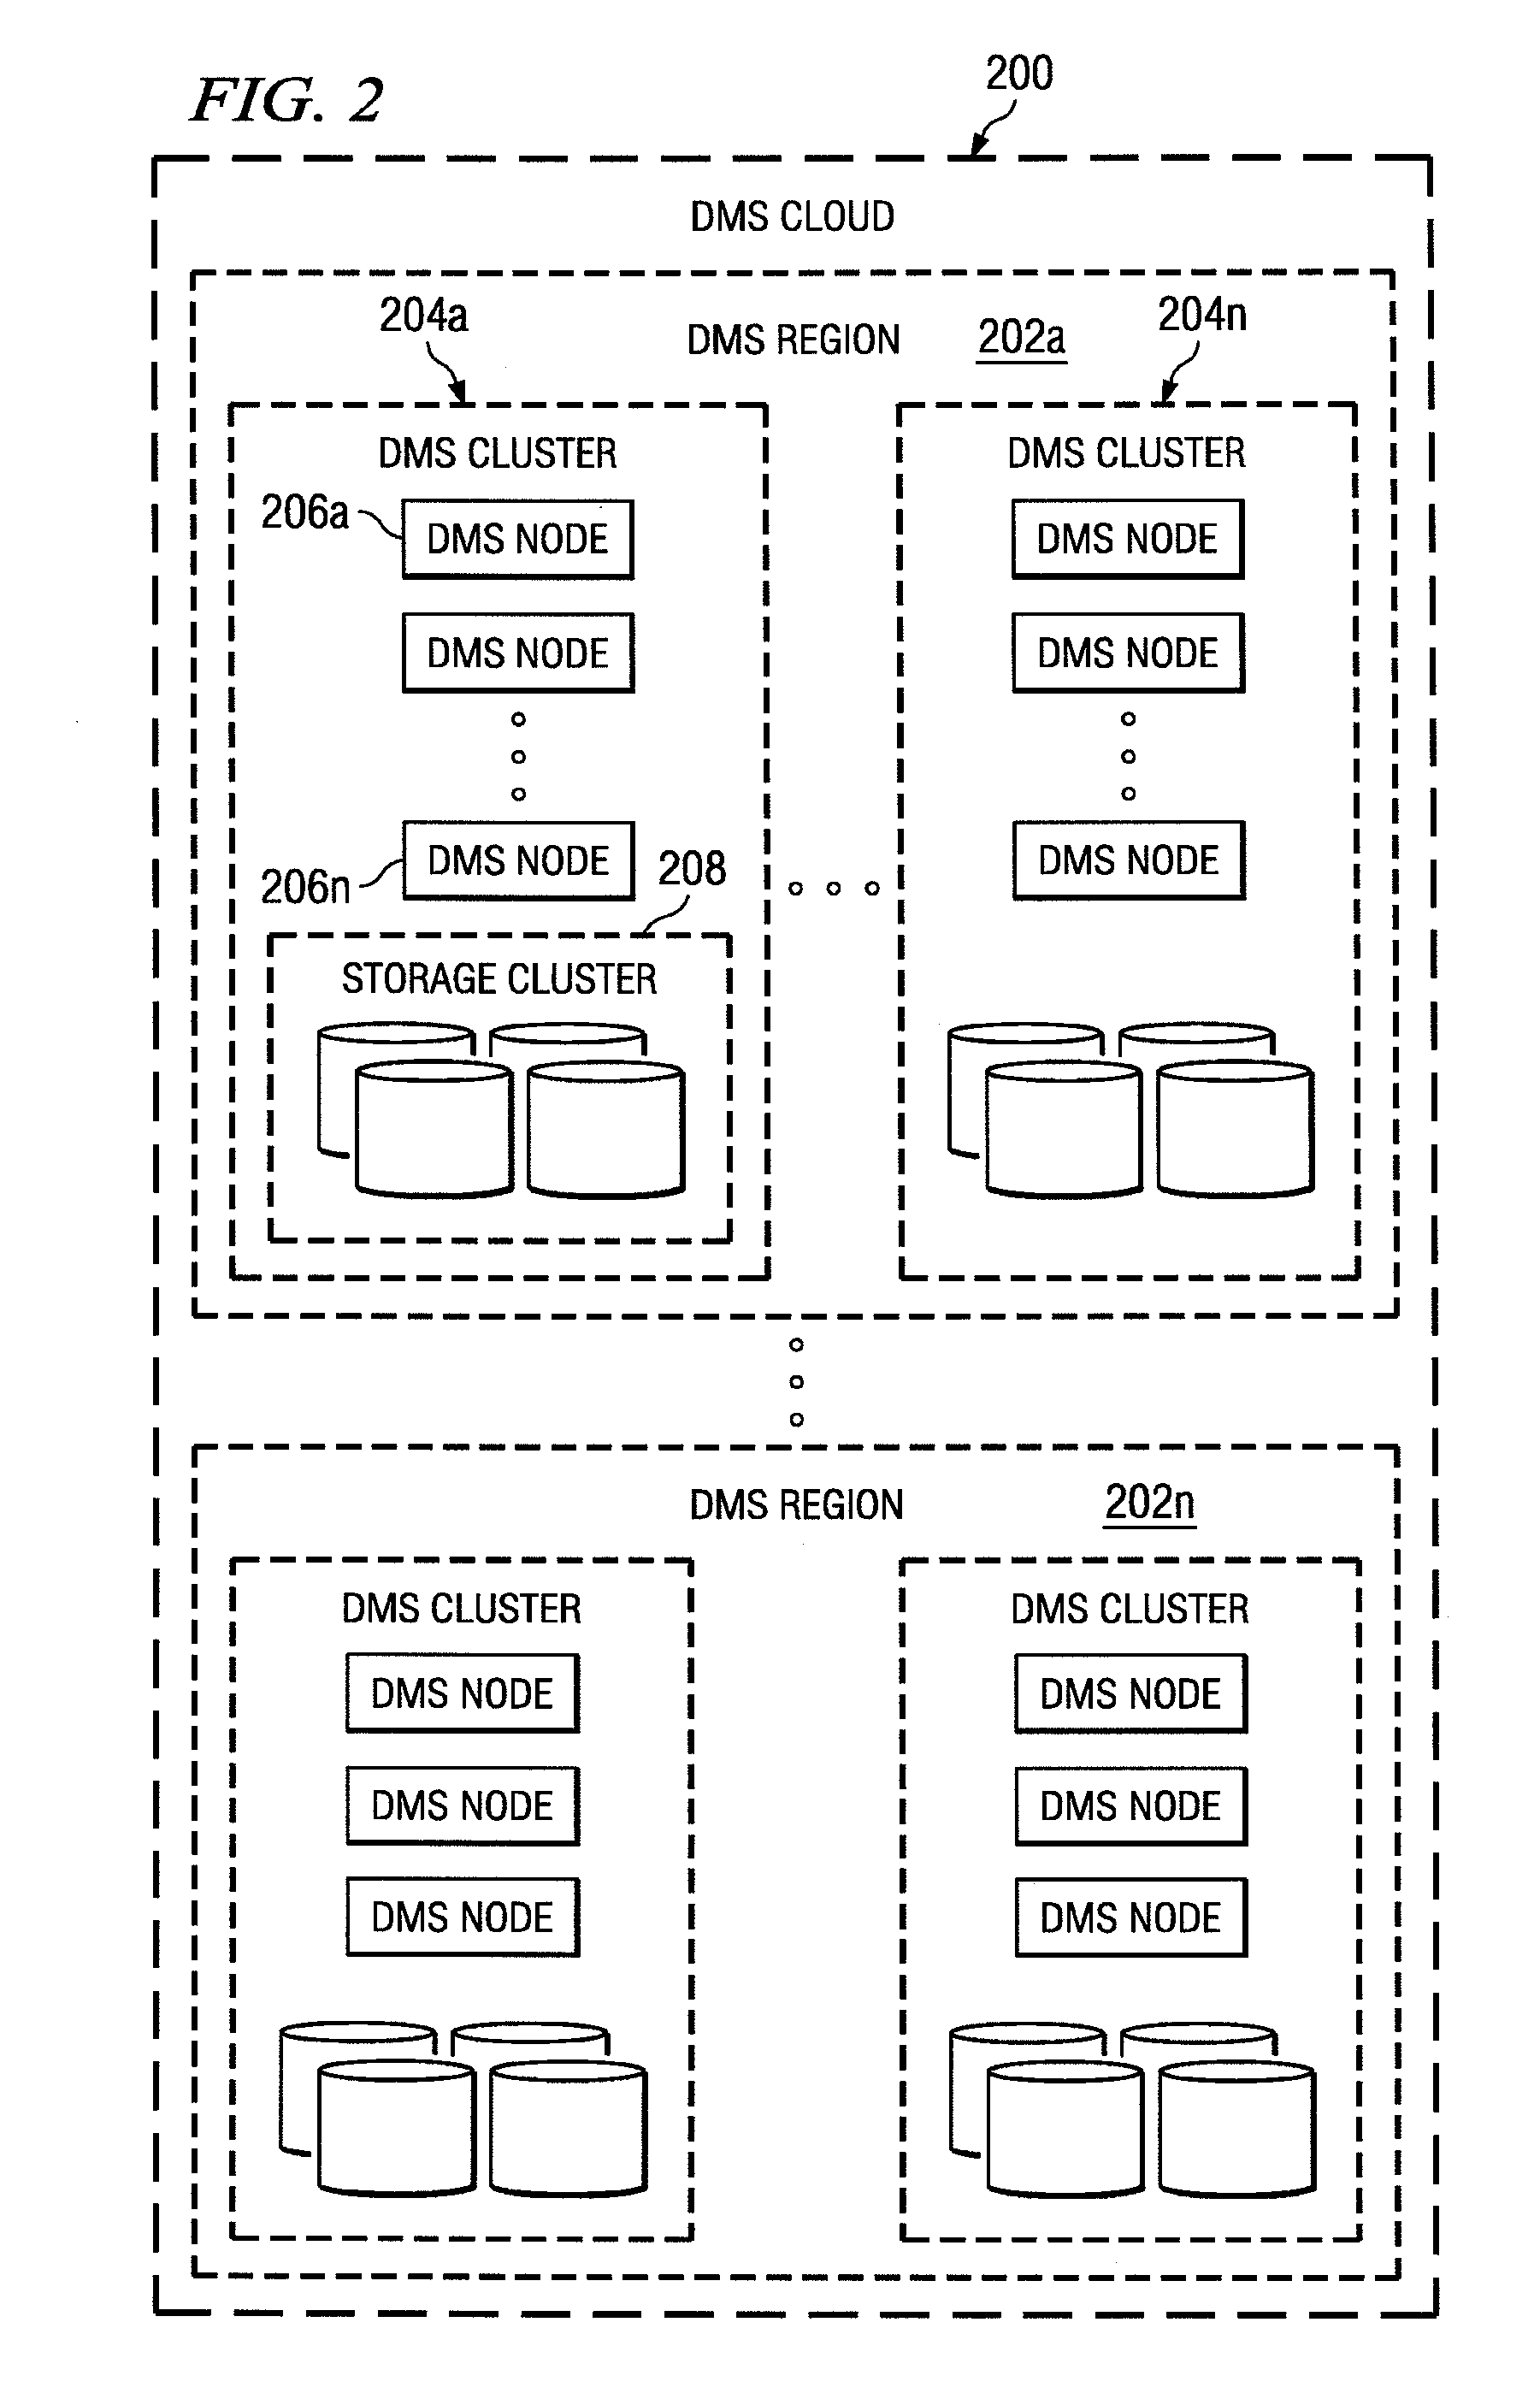 Method and system for real-time event journaling to provide enterprise data services